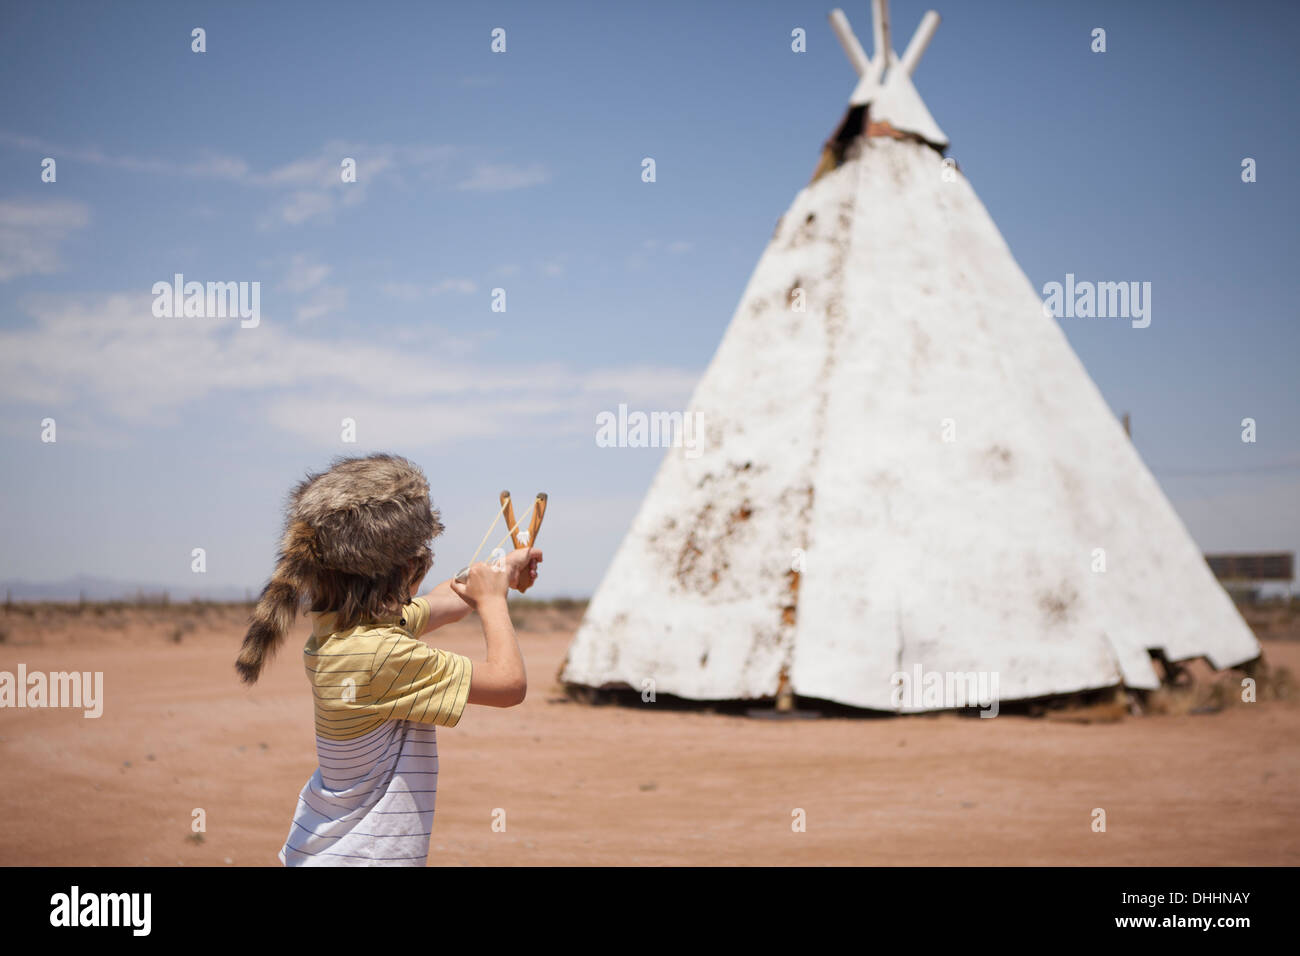 Boy aiming slingshot at teepee, Indian Reservation, USA Stock Photo